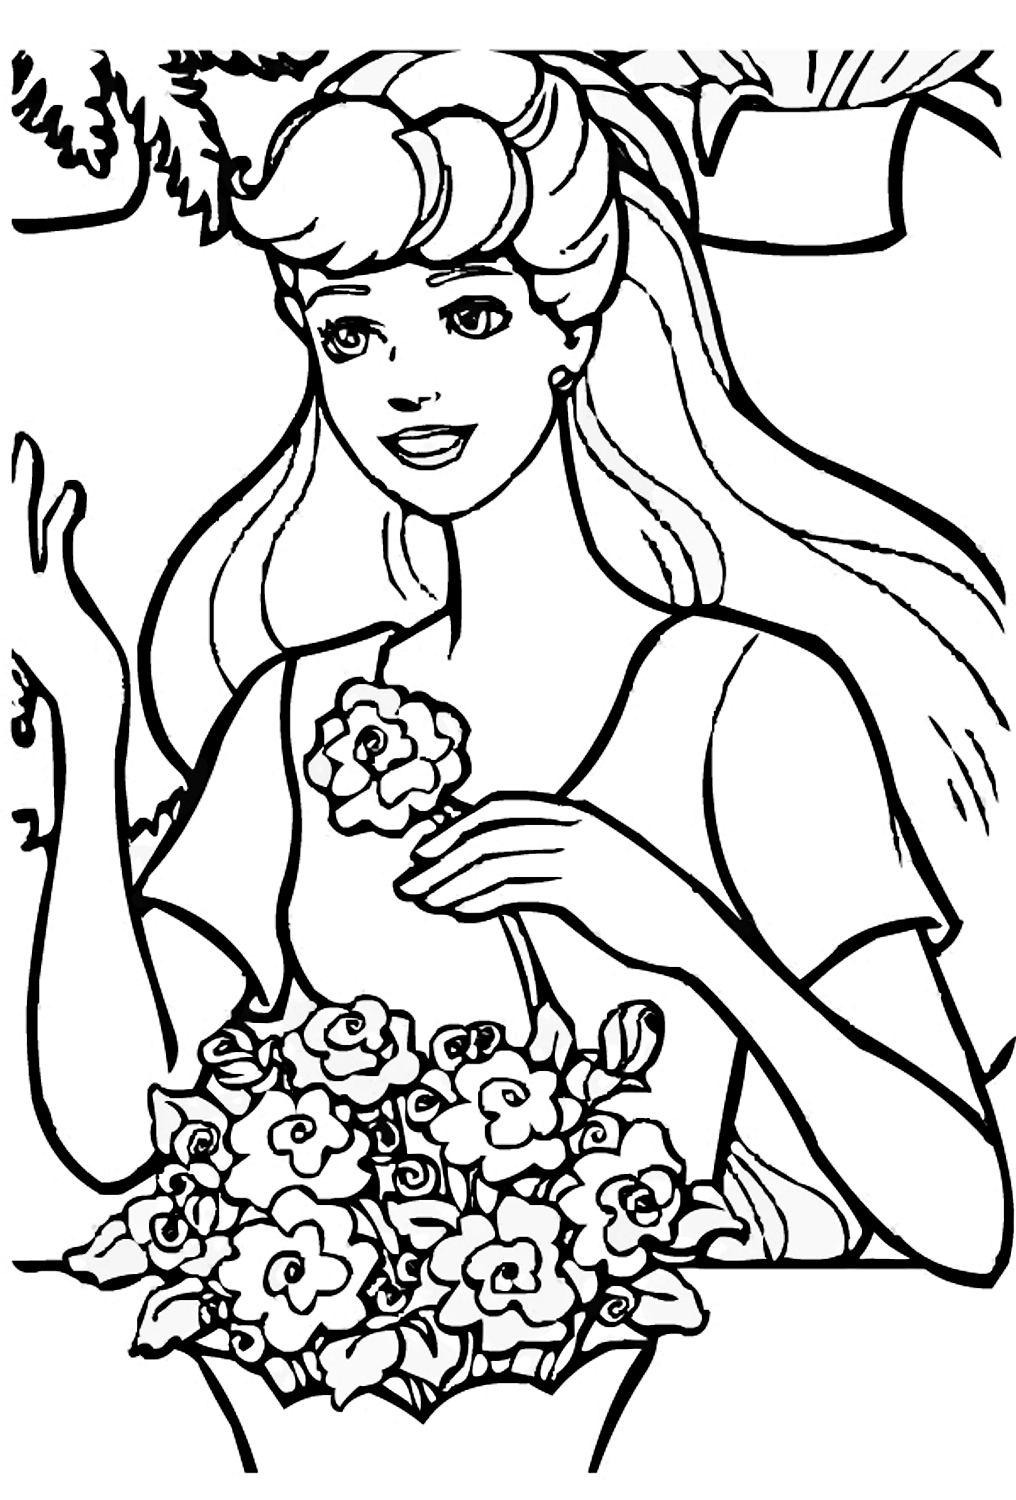 Barbie 01  coloring page to print and coloring